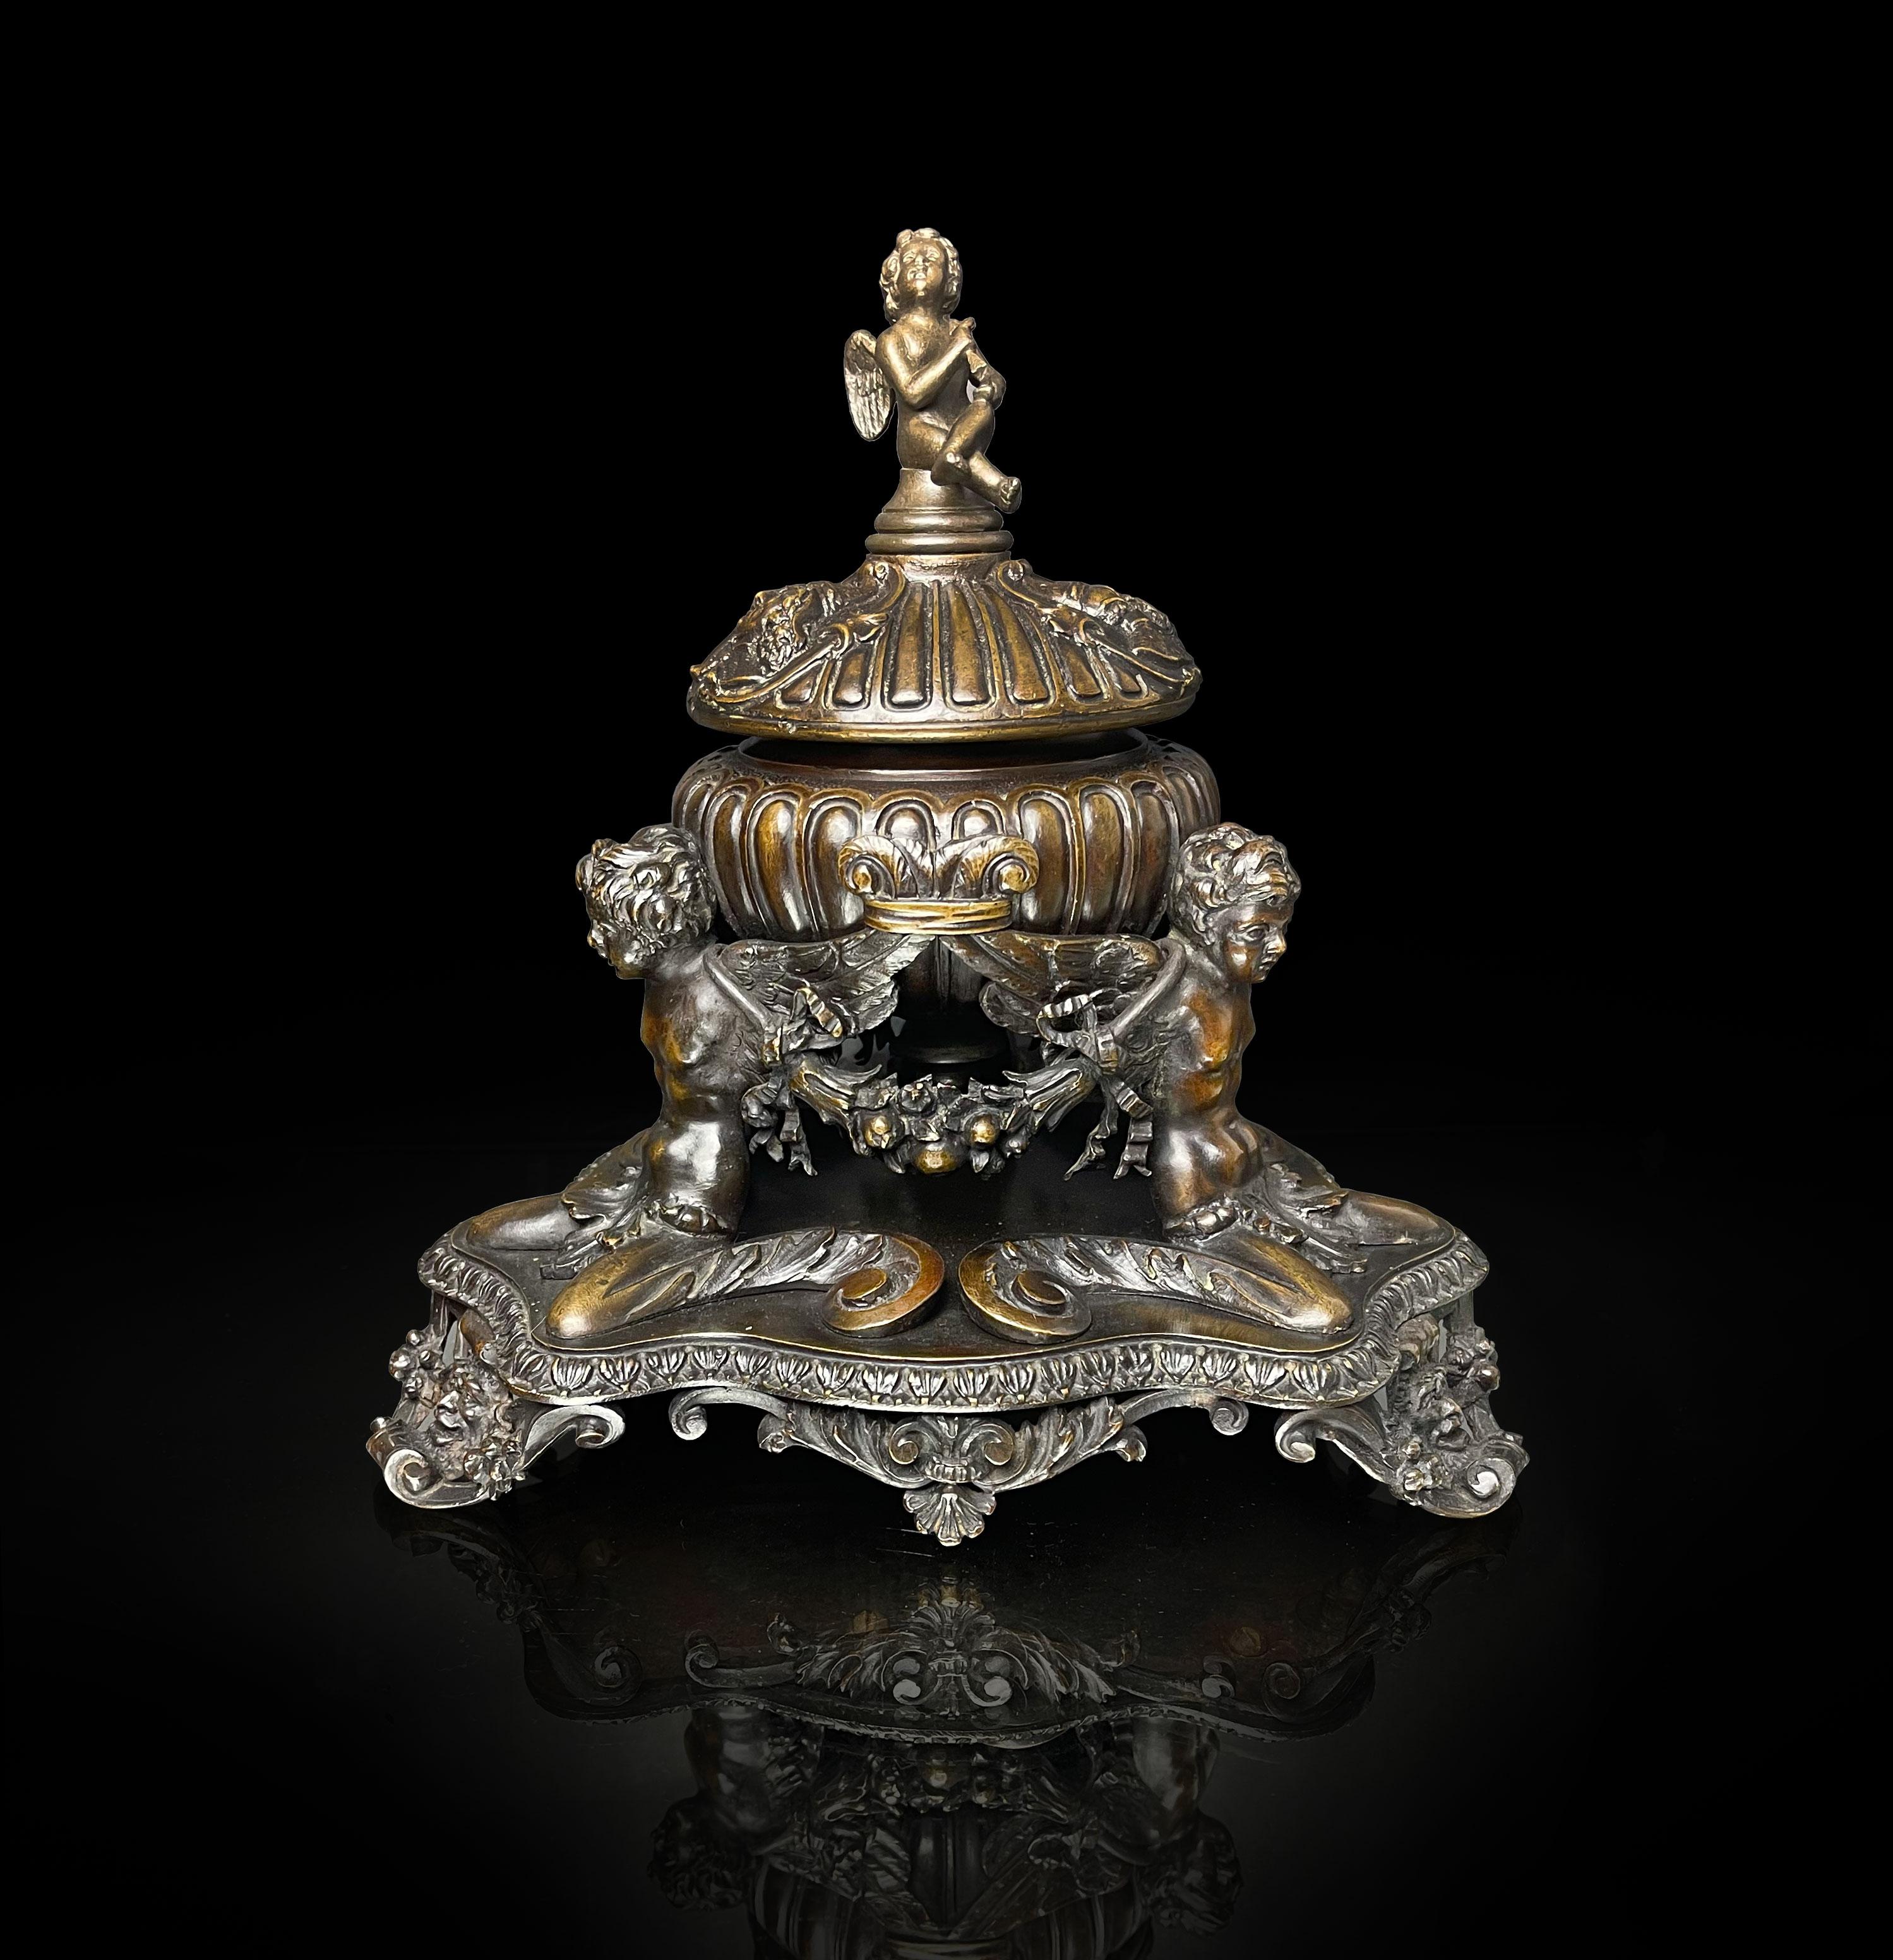 An Elaborated Renaissance style patinated bronze inkwell by e.f. Caldwell & Co., New York, Early 20th Century. surmounted by a putti and supported by three winged cherubs joined by flower garlands.
Measures: Height: 10 in. (25.4 cm)
Width: 7.75